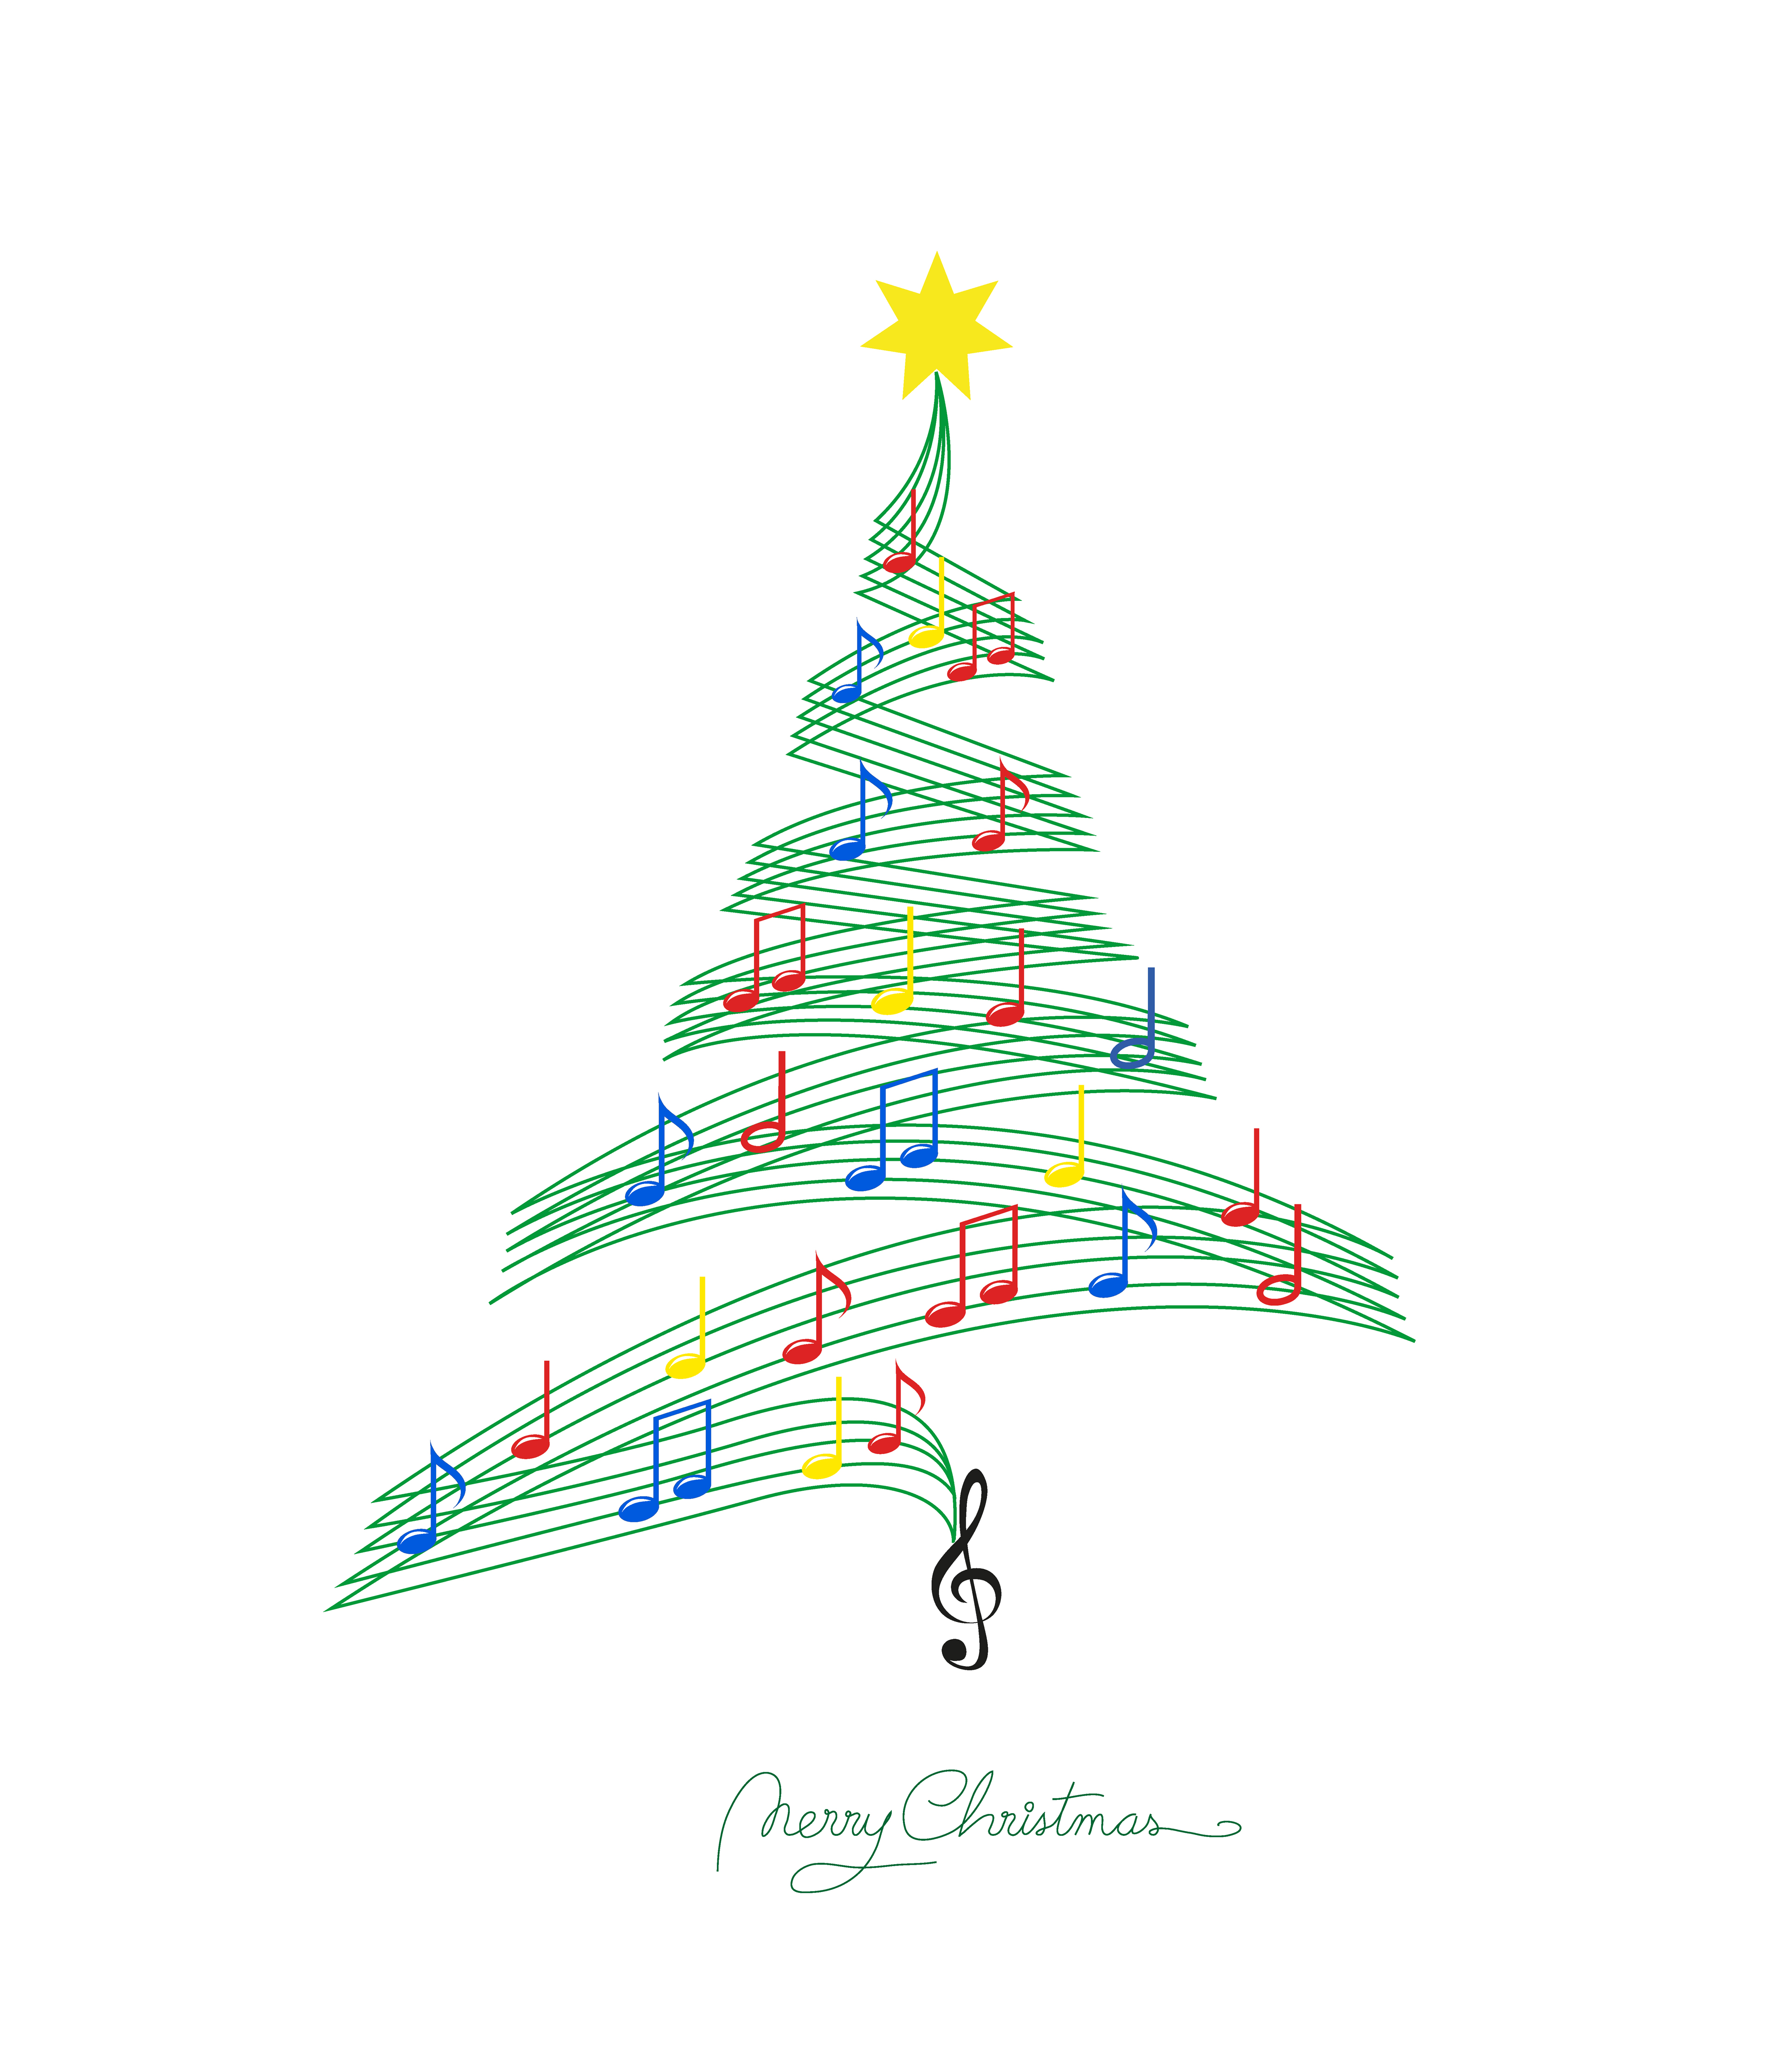 What is your favorite Christmas song?